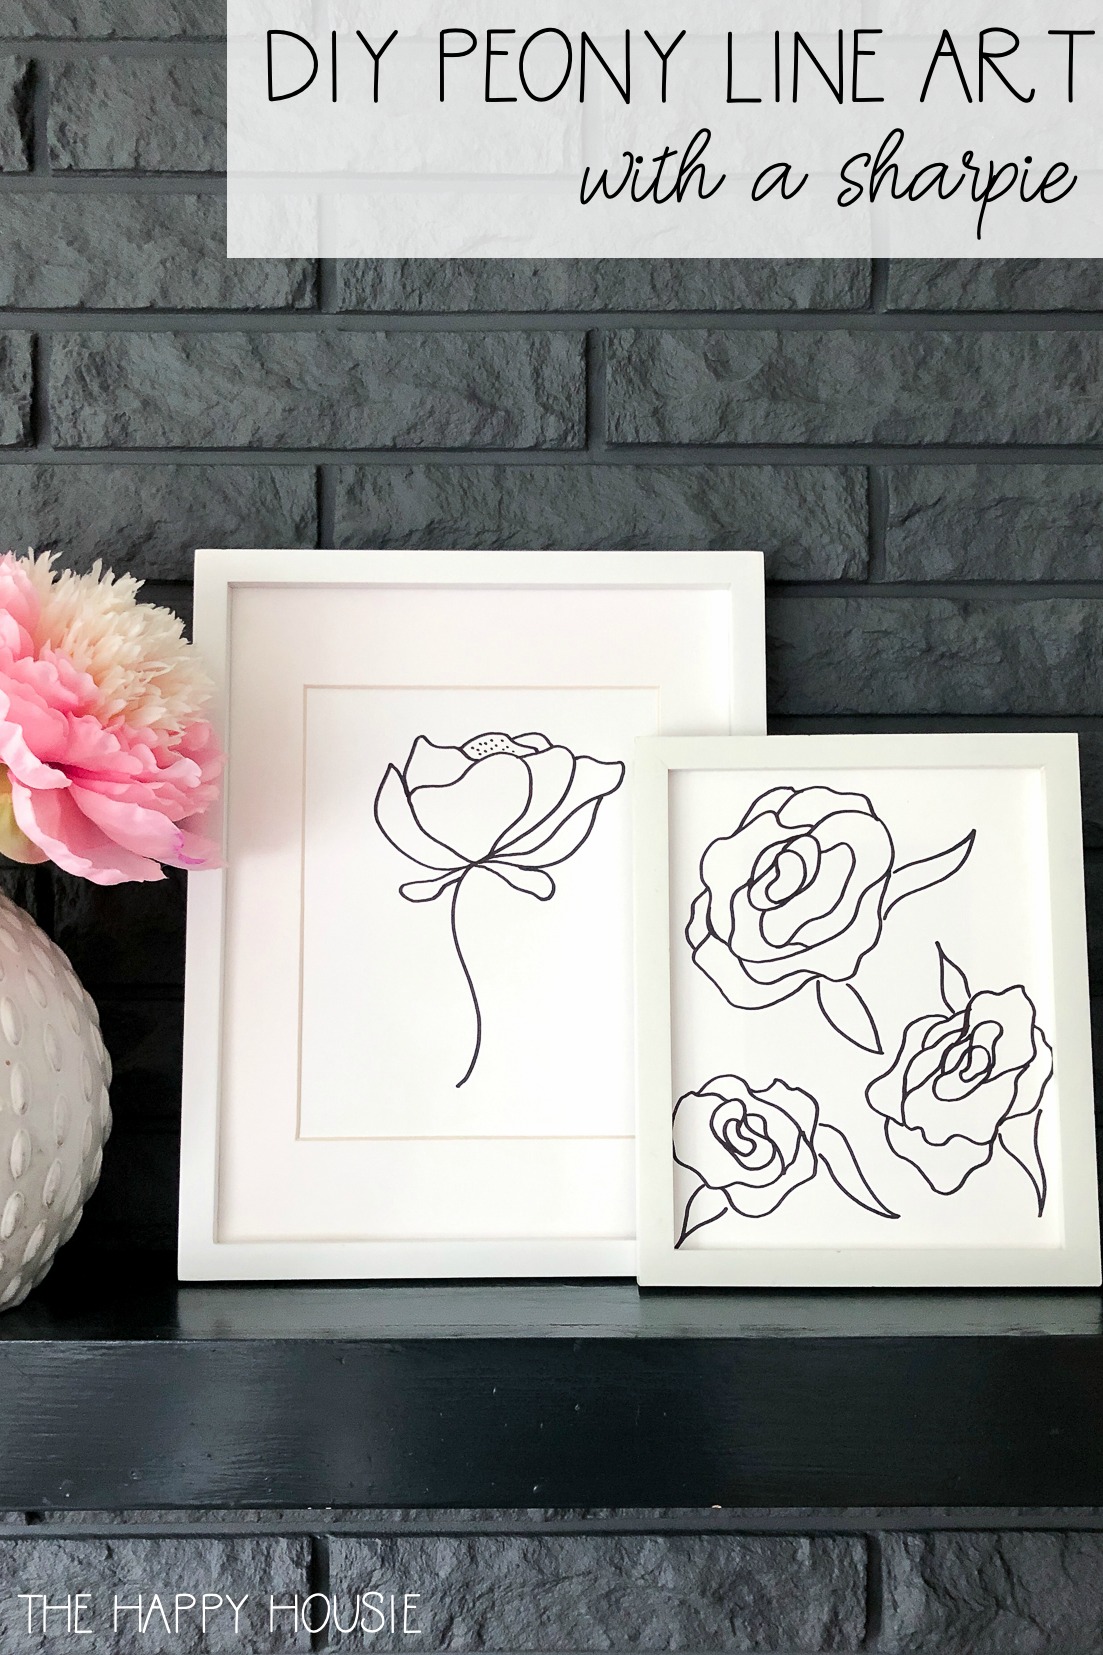 DIY peony line art with a sharpie graphic.